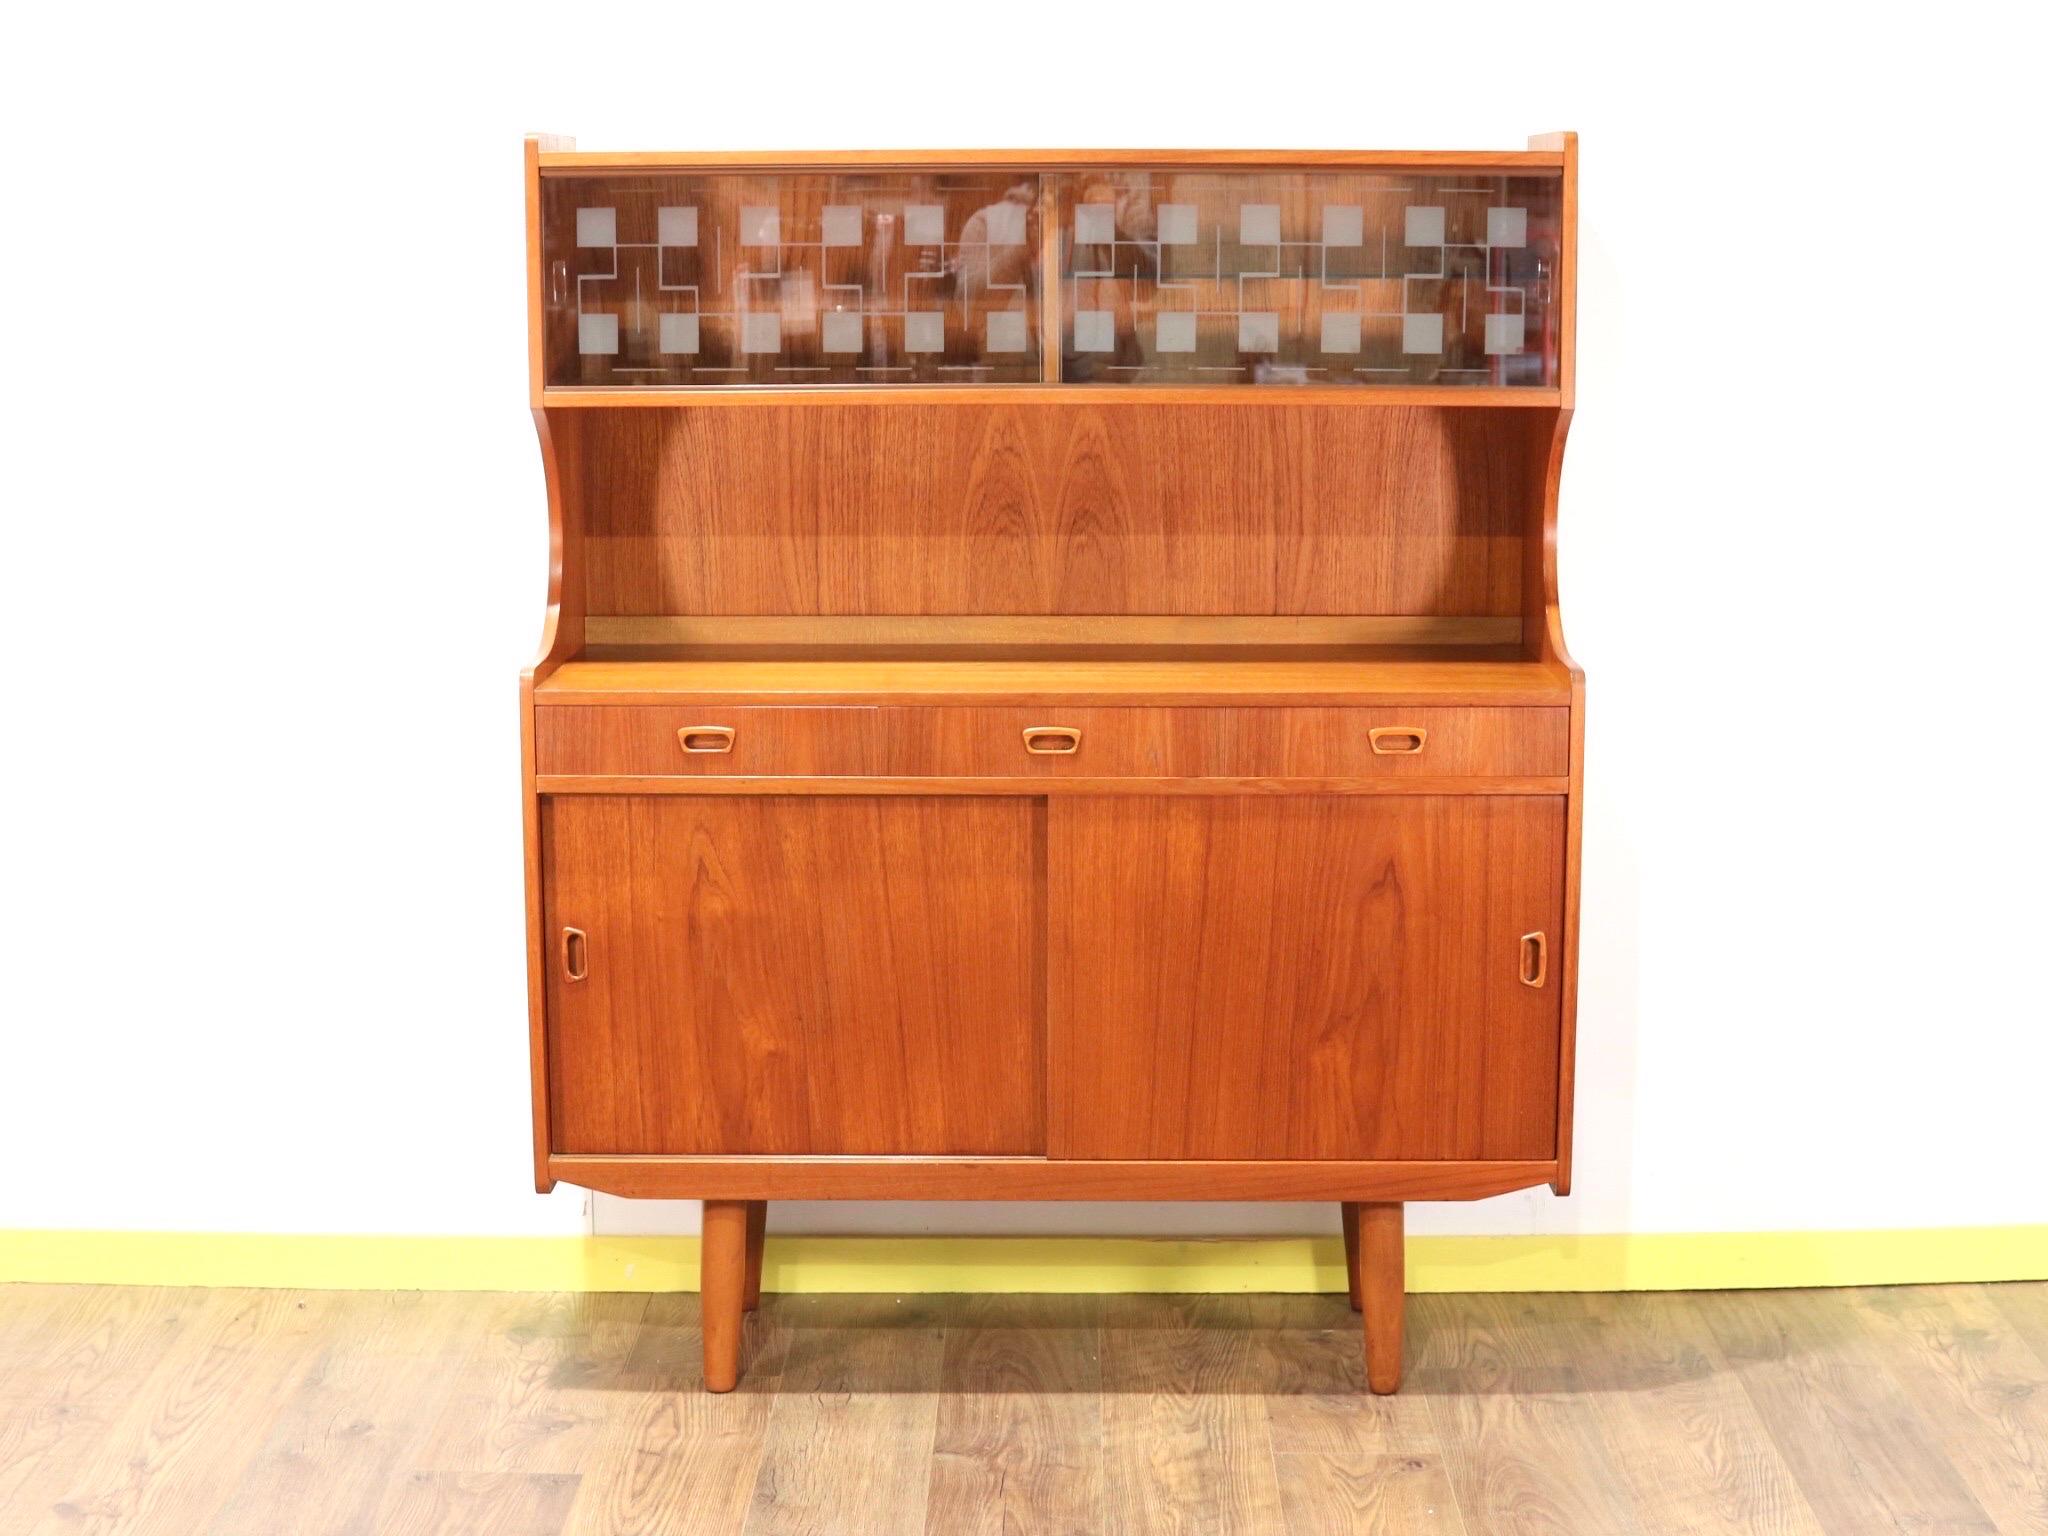 A stunning Scandinavian mid century hutch that would look fabulous in any living space. With a variety of uses the piece is a really useful/beutiful item if furniture featuring plenty of storage.